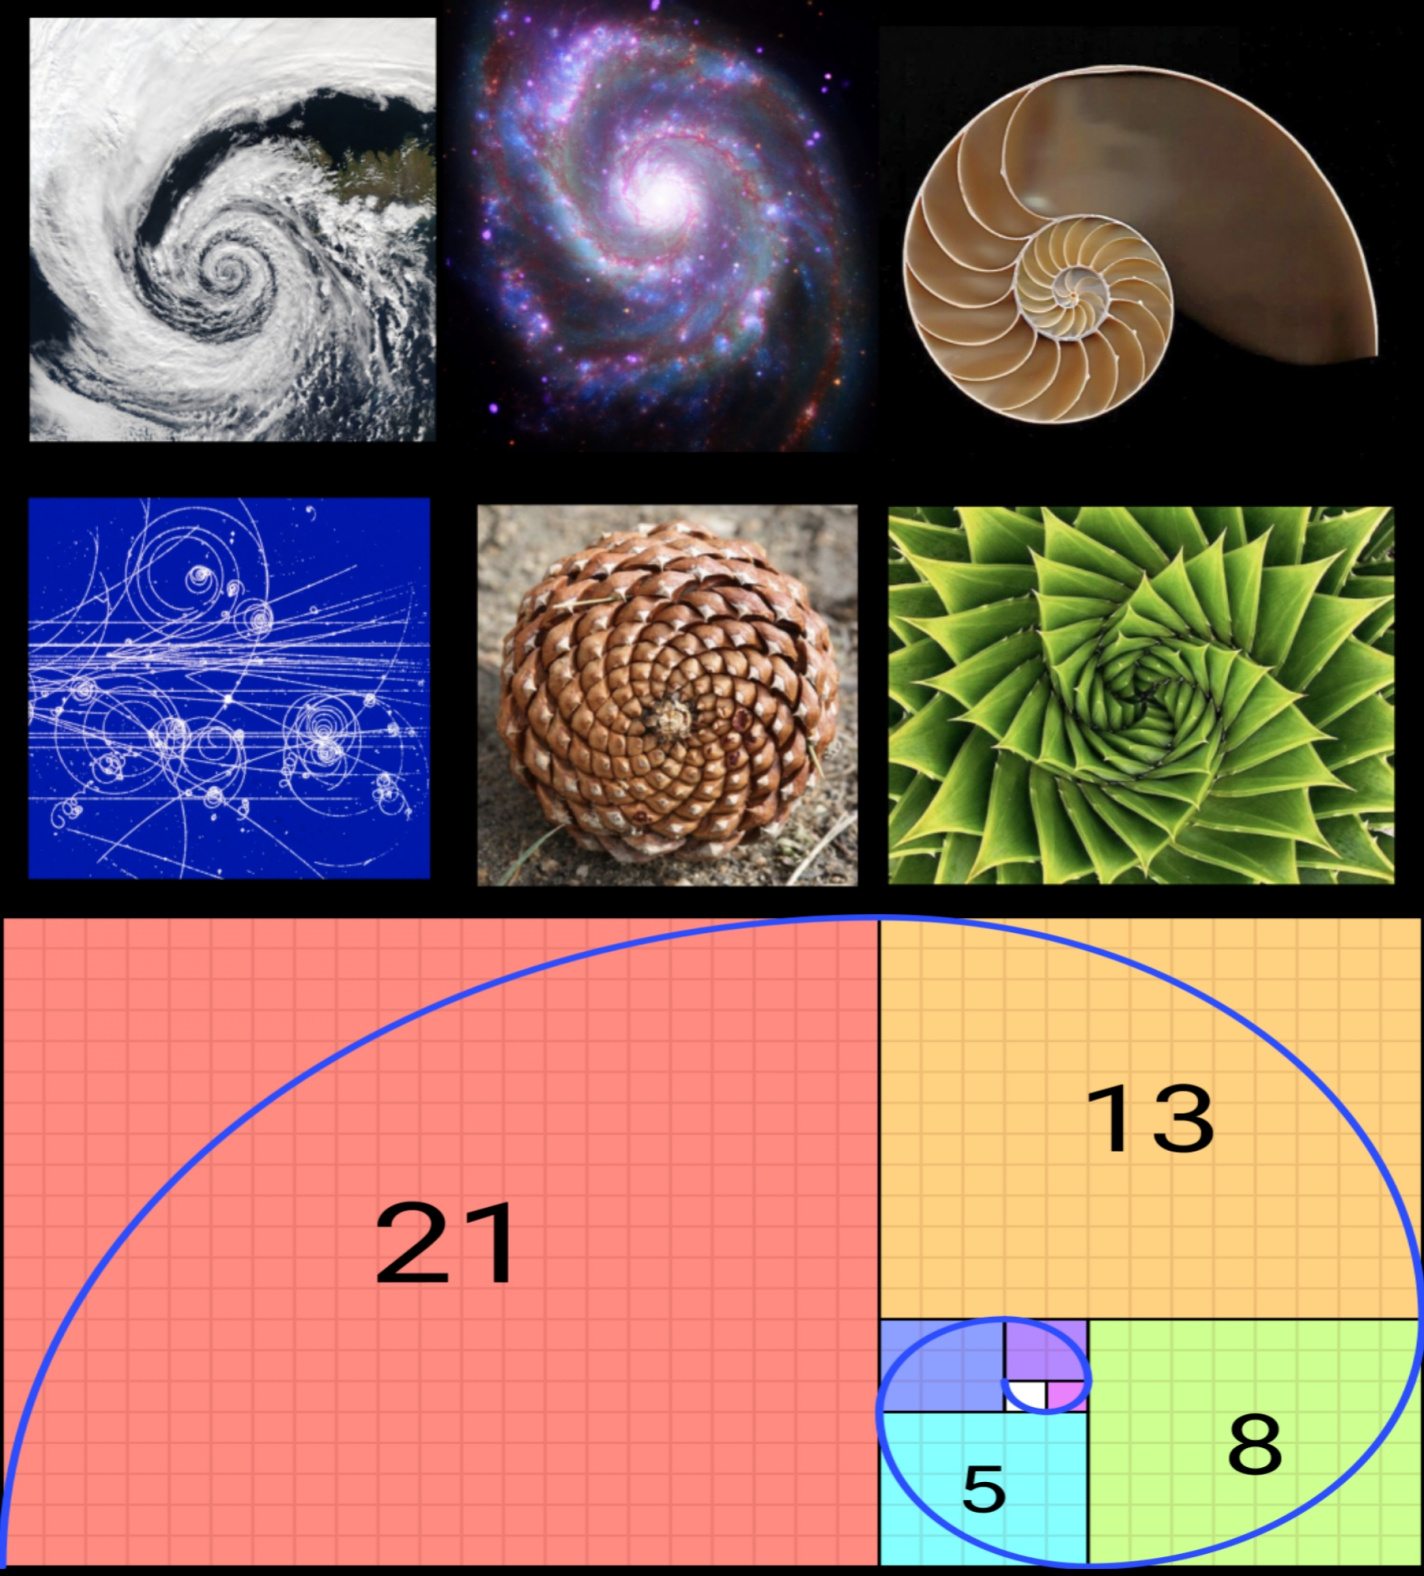 407-million-year-old fossil challenges long-held theory on Fibonacci spirals found in nature 2